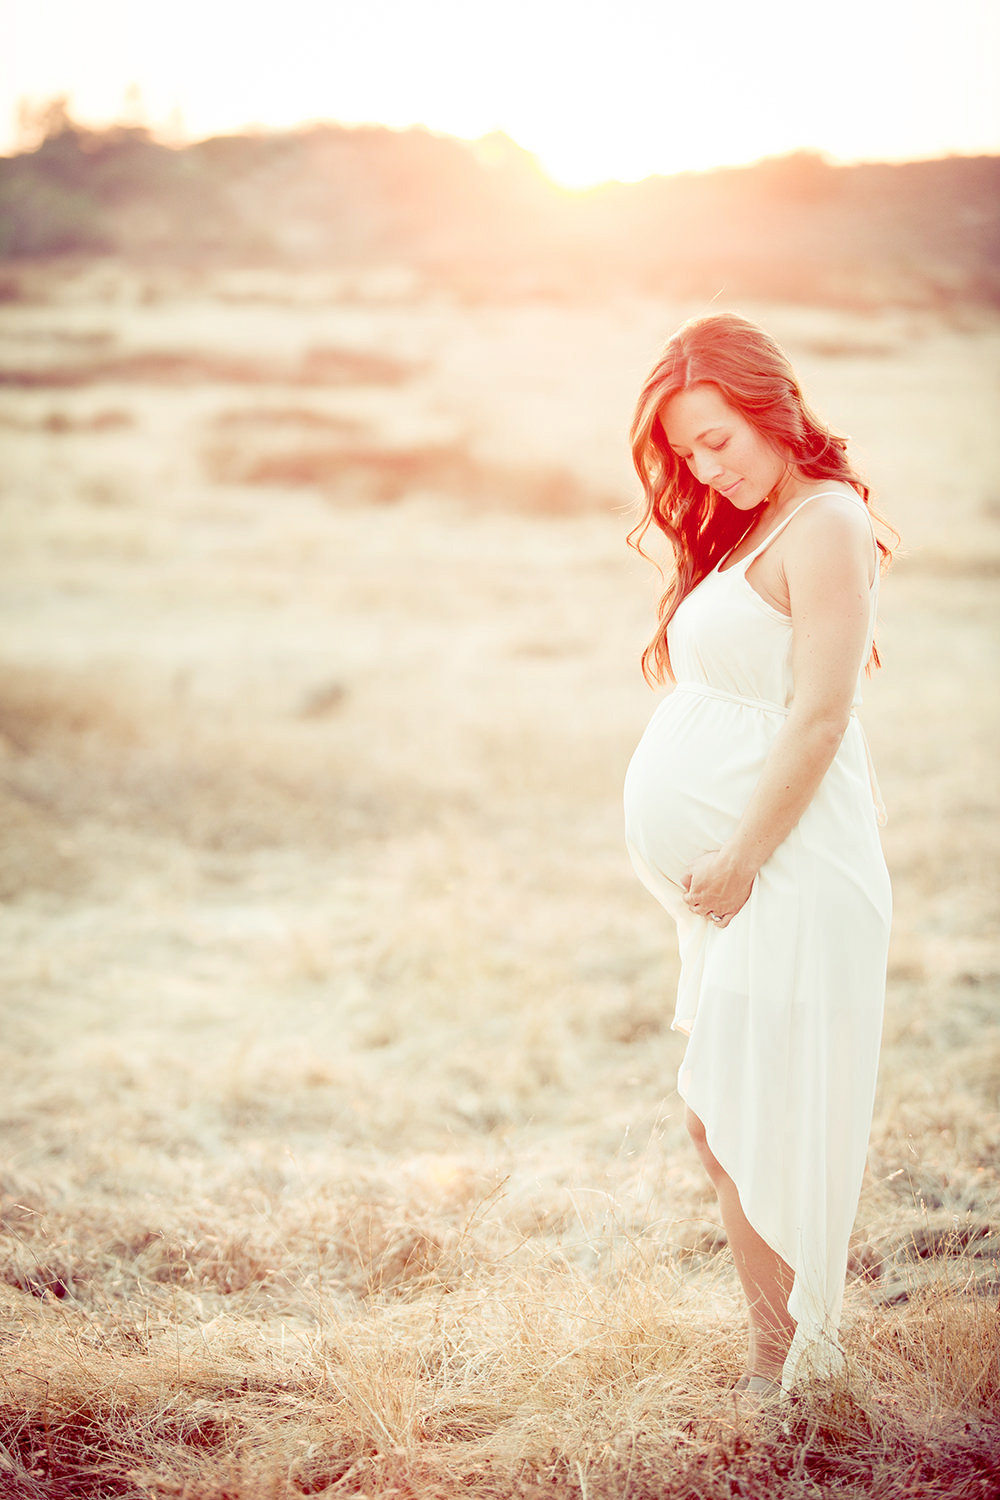 Gorgeous soon to be Mom at golden hour.